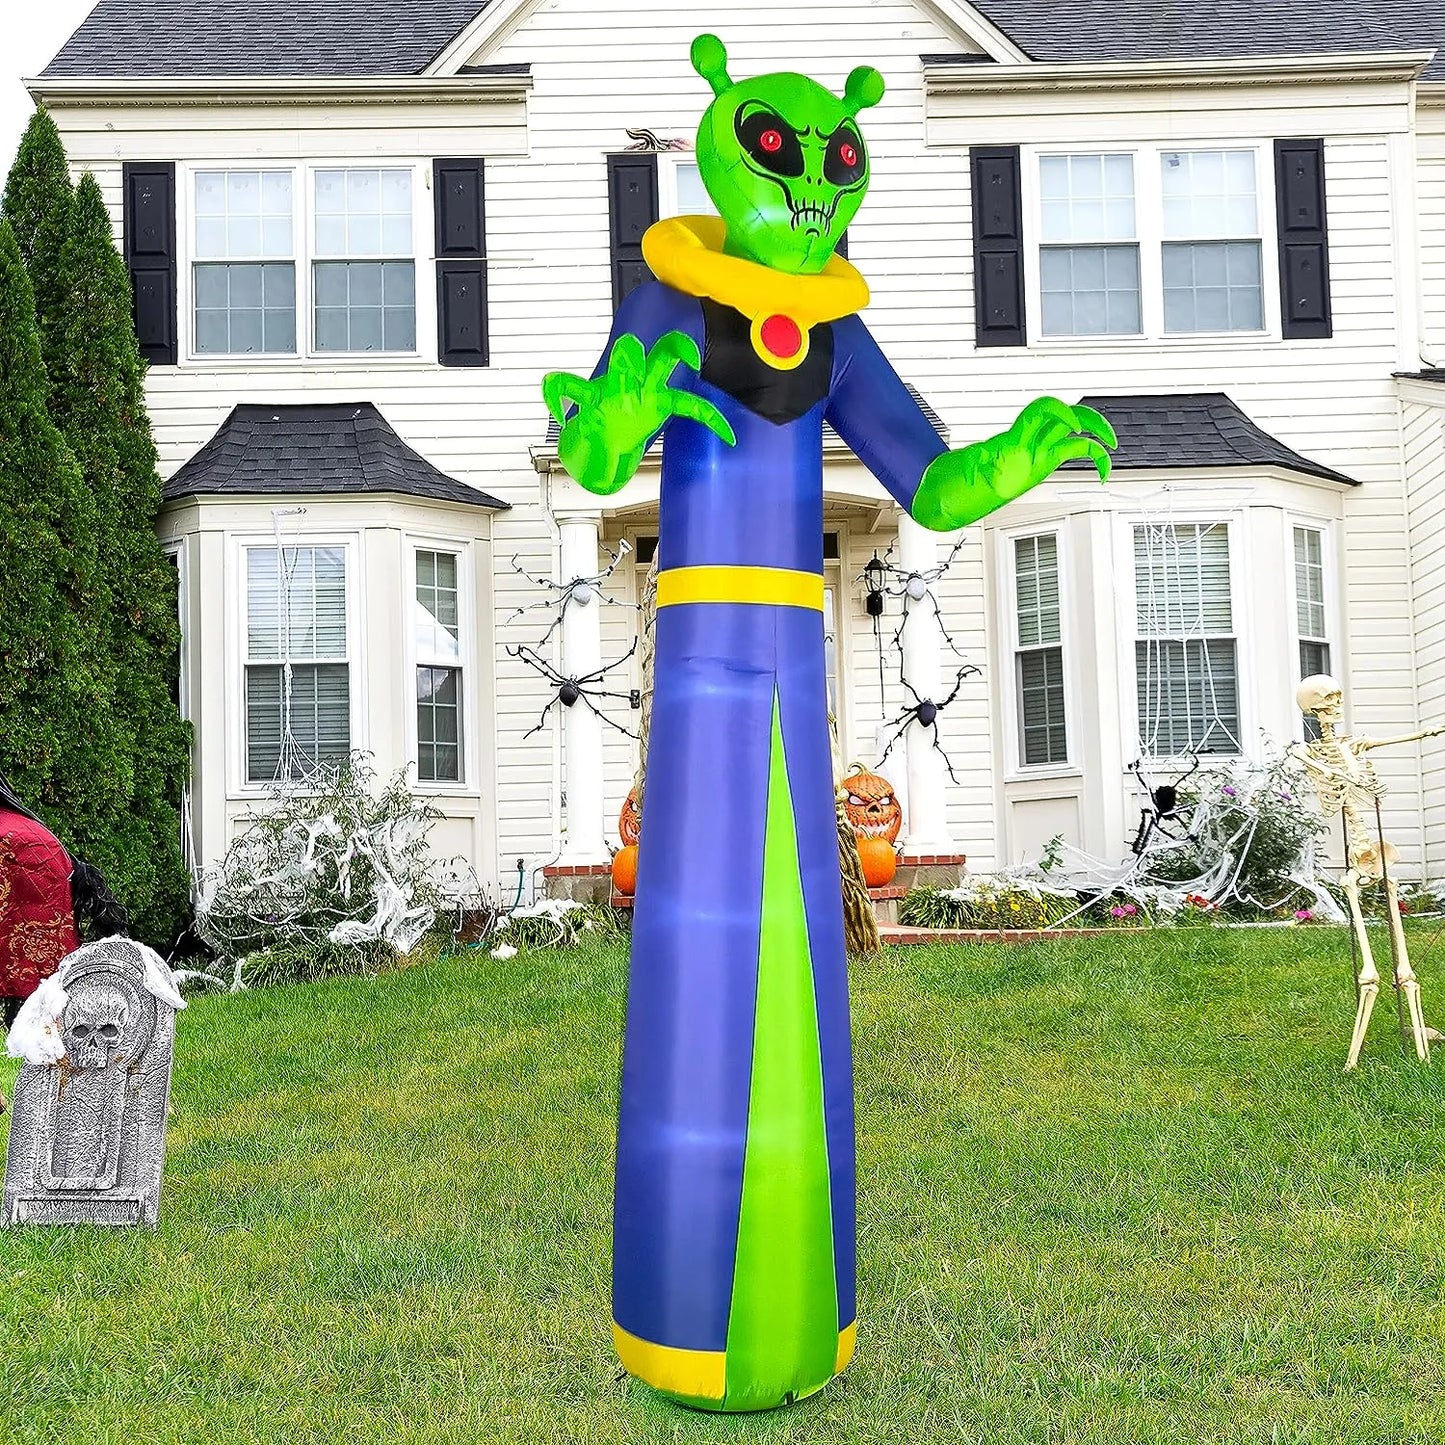 Joiedomi 12ft Tall Giant Halloween Inflatable Alien with Build-in LEDs